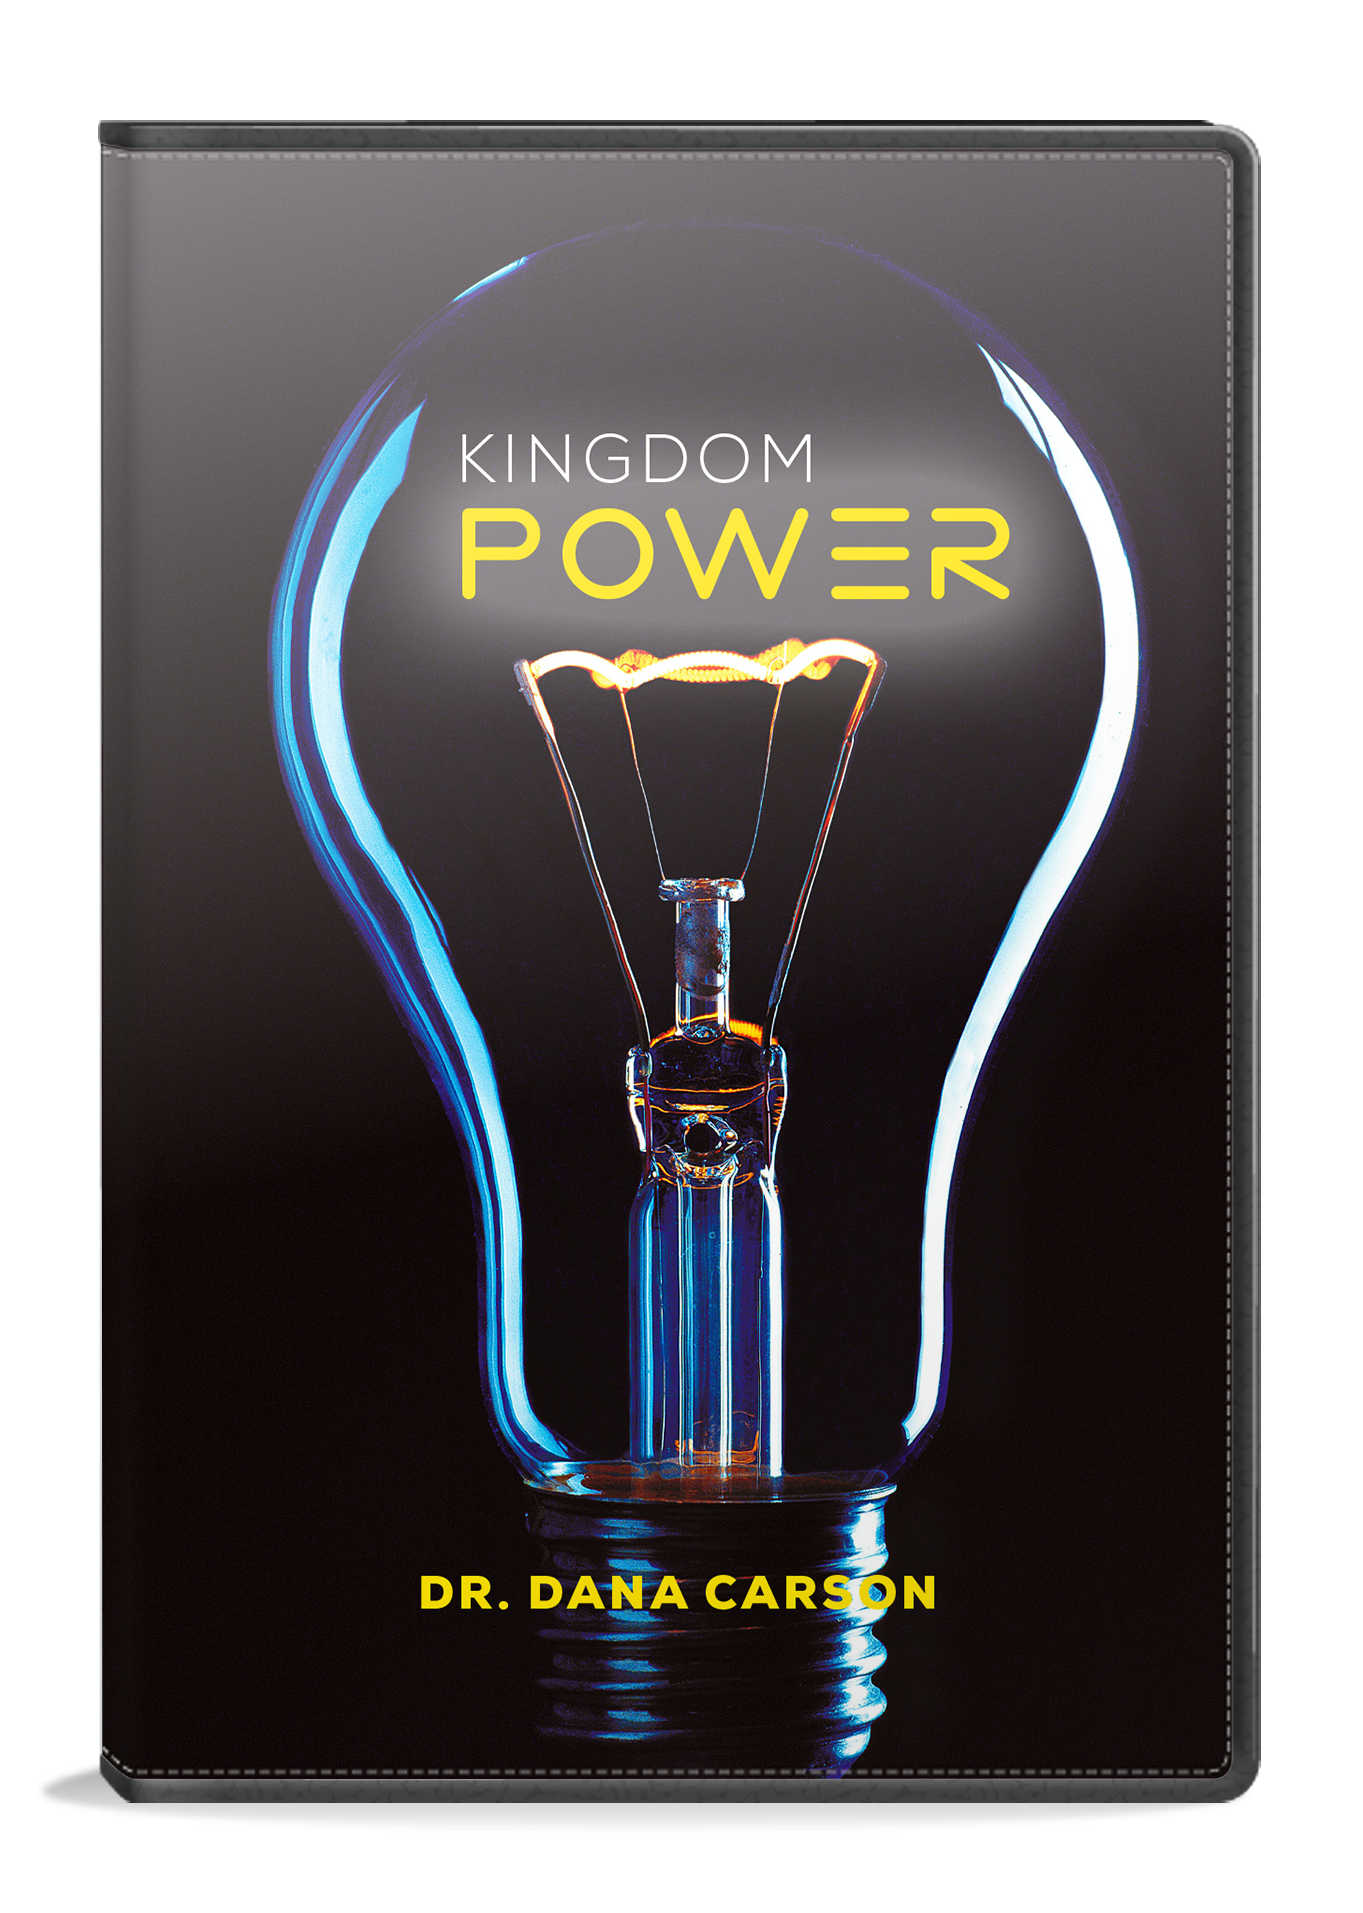 Operating in Kingdom Power - Part 3